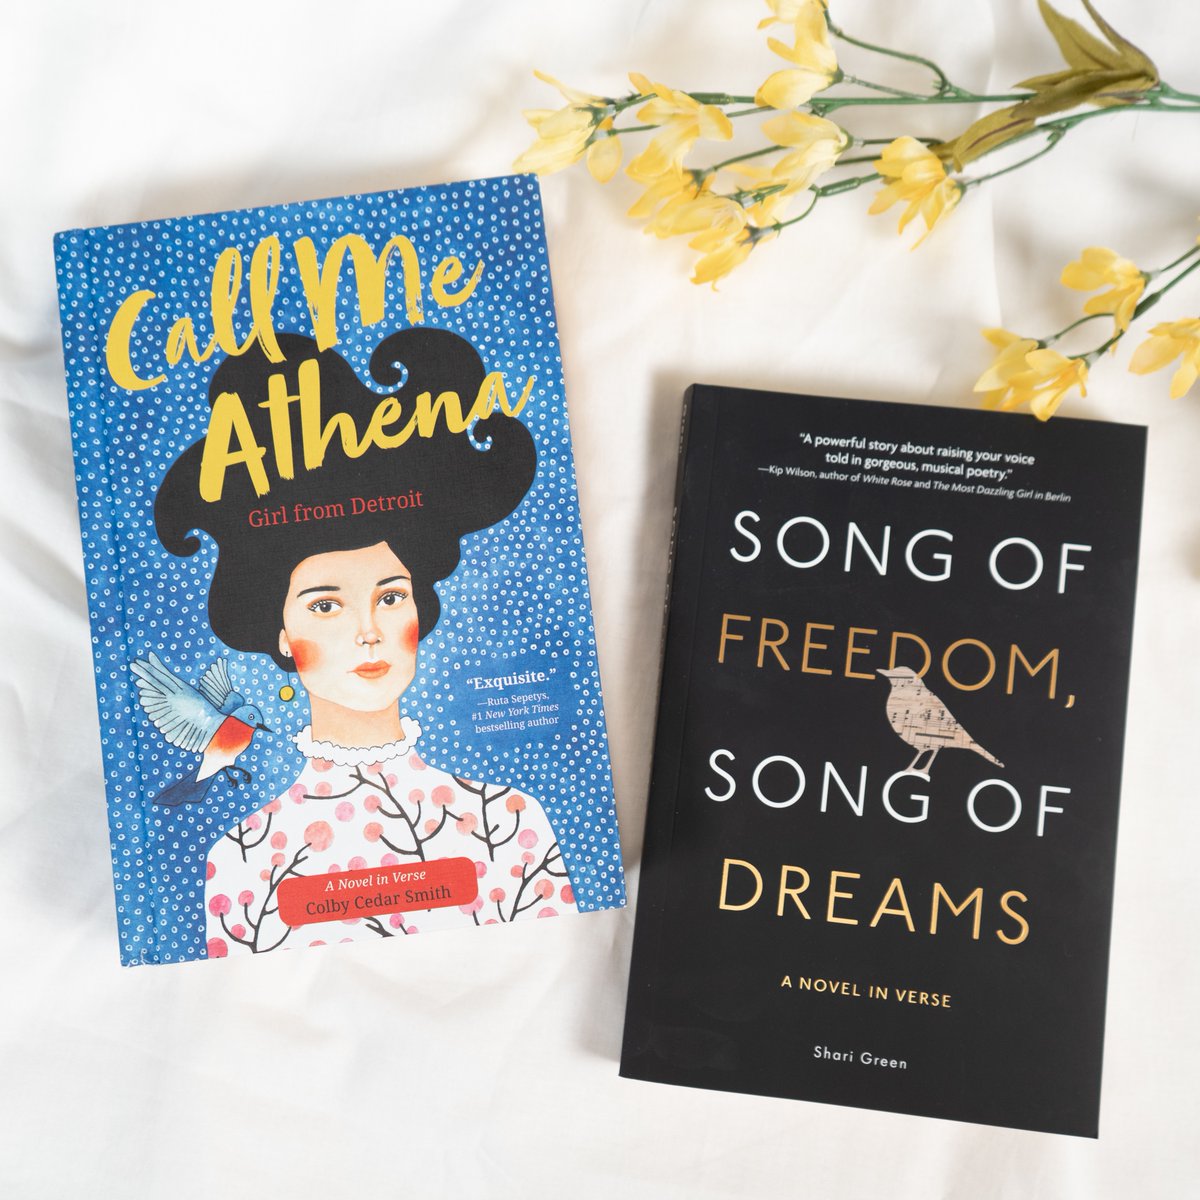 Happy International Women's Day! We are grateful to work with so many incredible women and share their stories, like Call Me Athena and Song of Freedom, Song of Dreams, both of which depict the power of women through generations 💐 @sharigreen @ColbyCedar